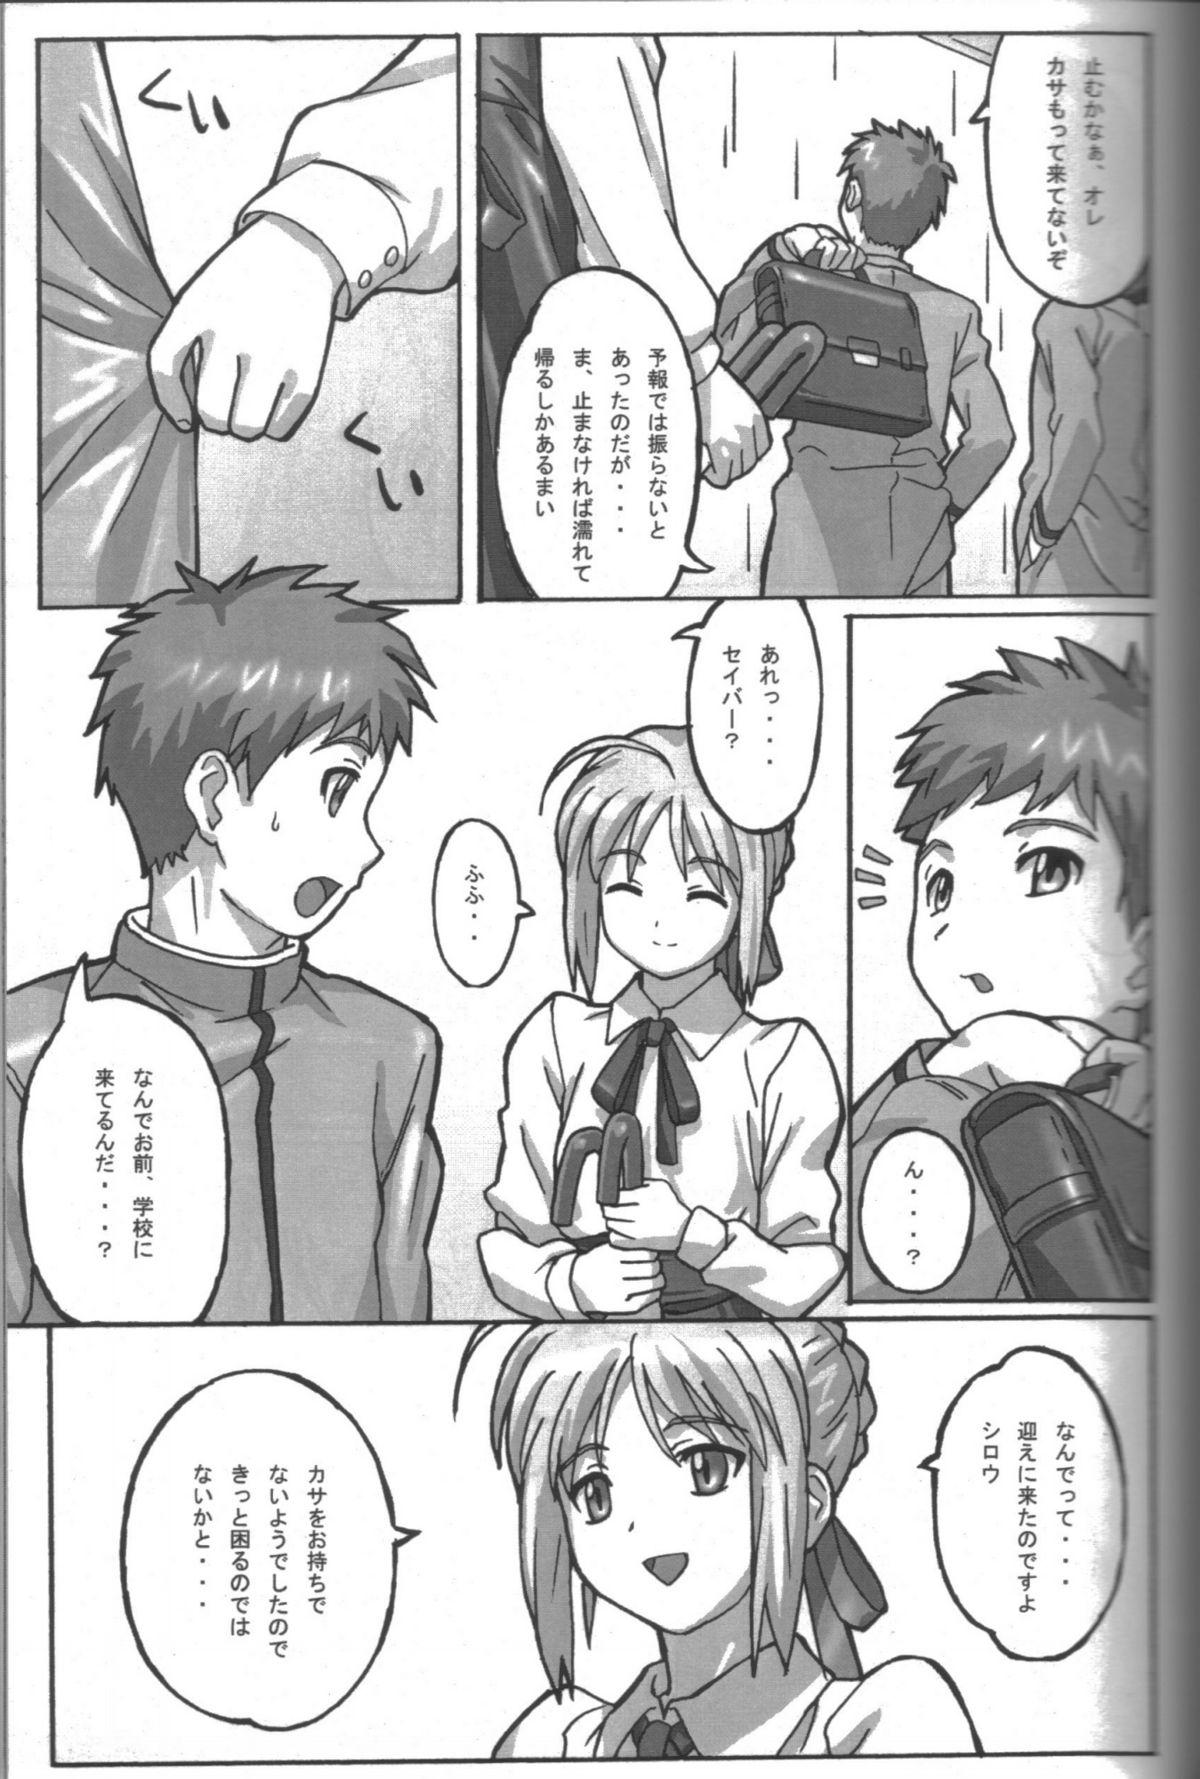 Lesbians A PIECE OF CAKE - Fate stay night Sloppy - Page 6